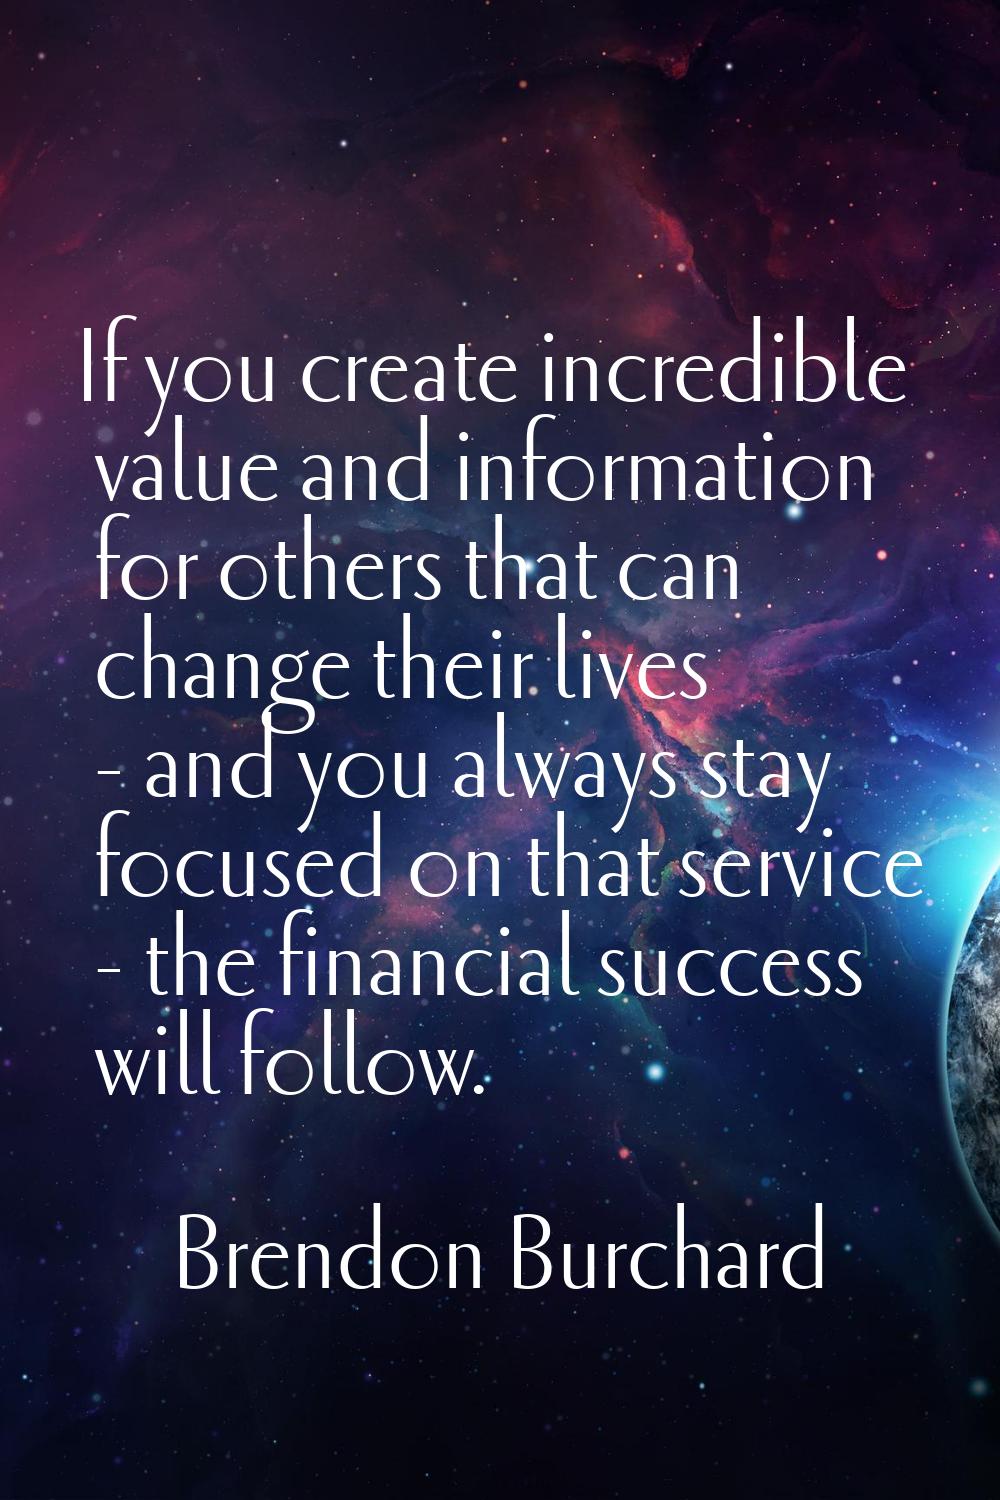 If you create incredible value and information for others that can change their lives - and you alw